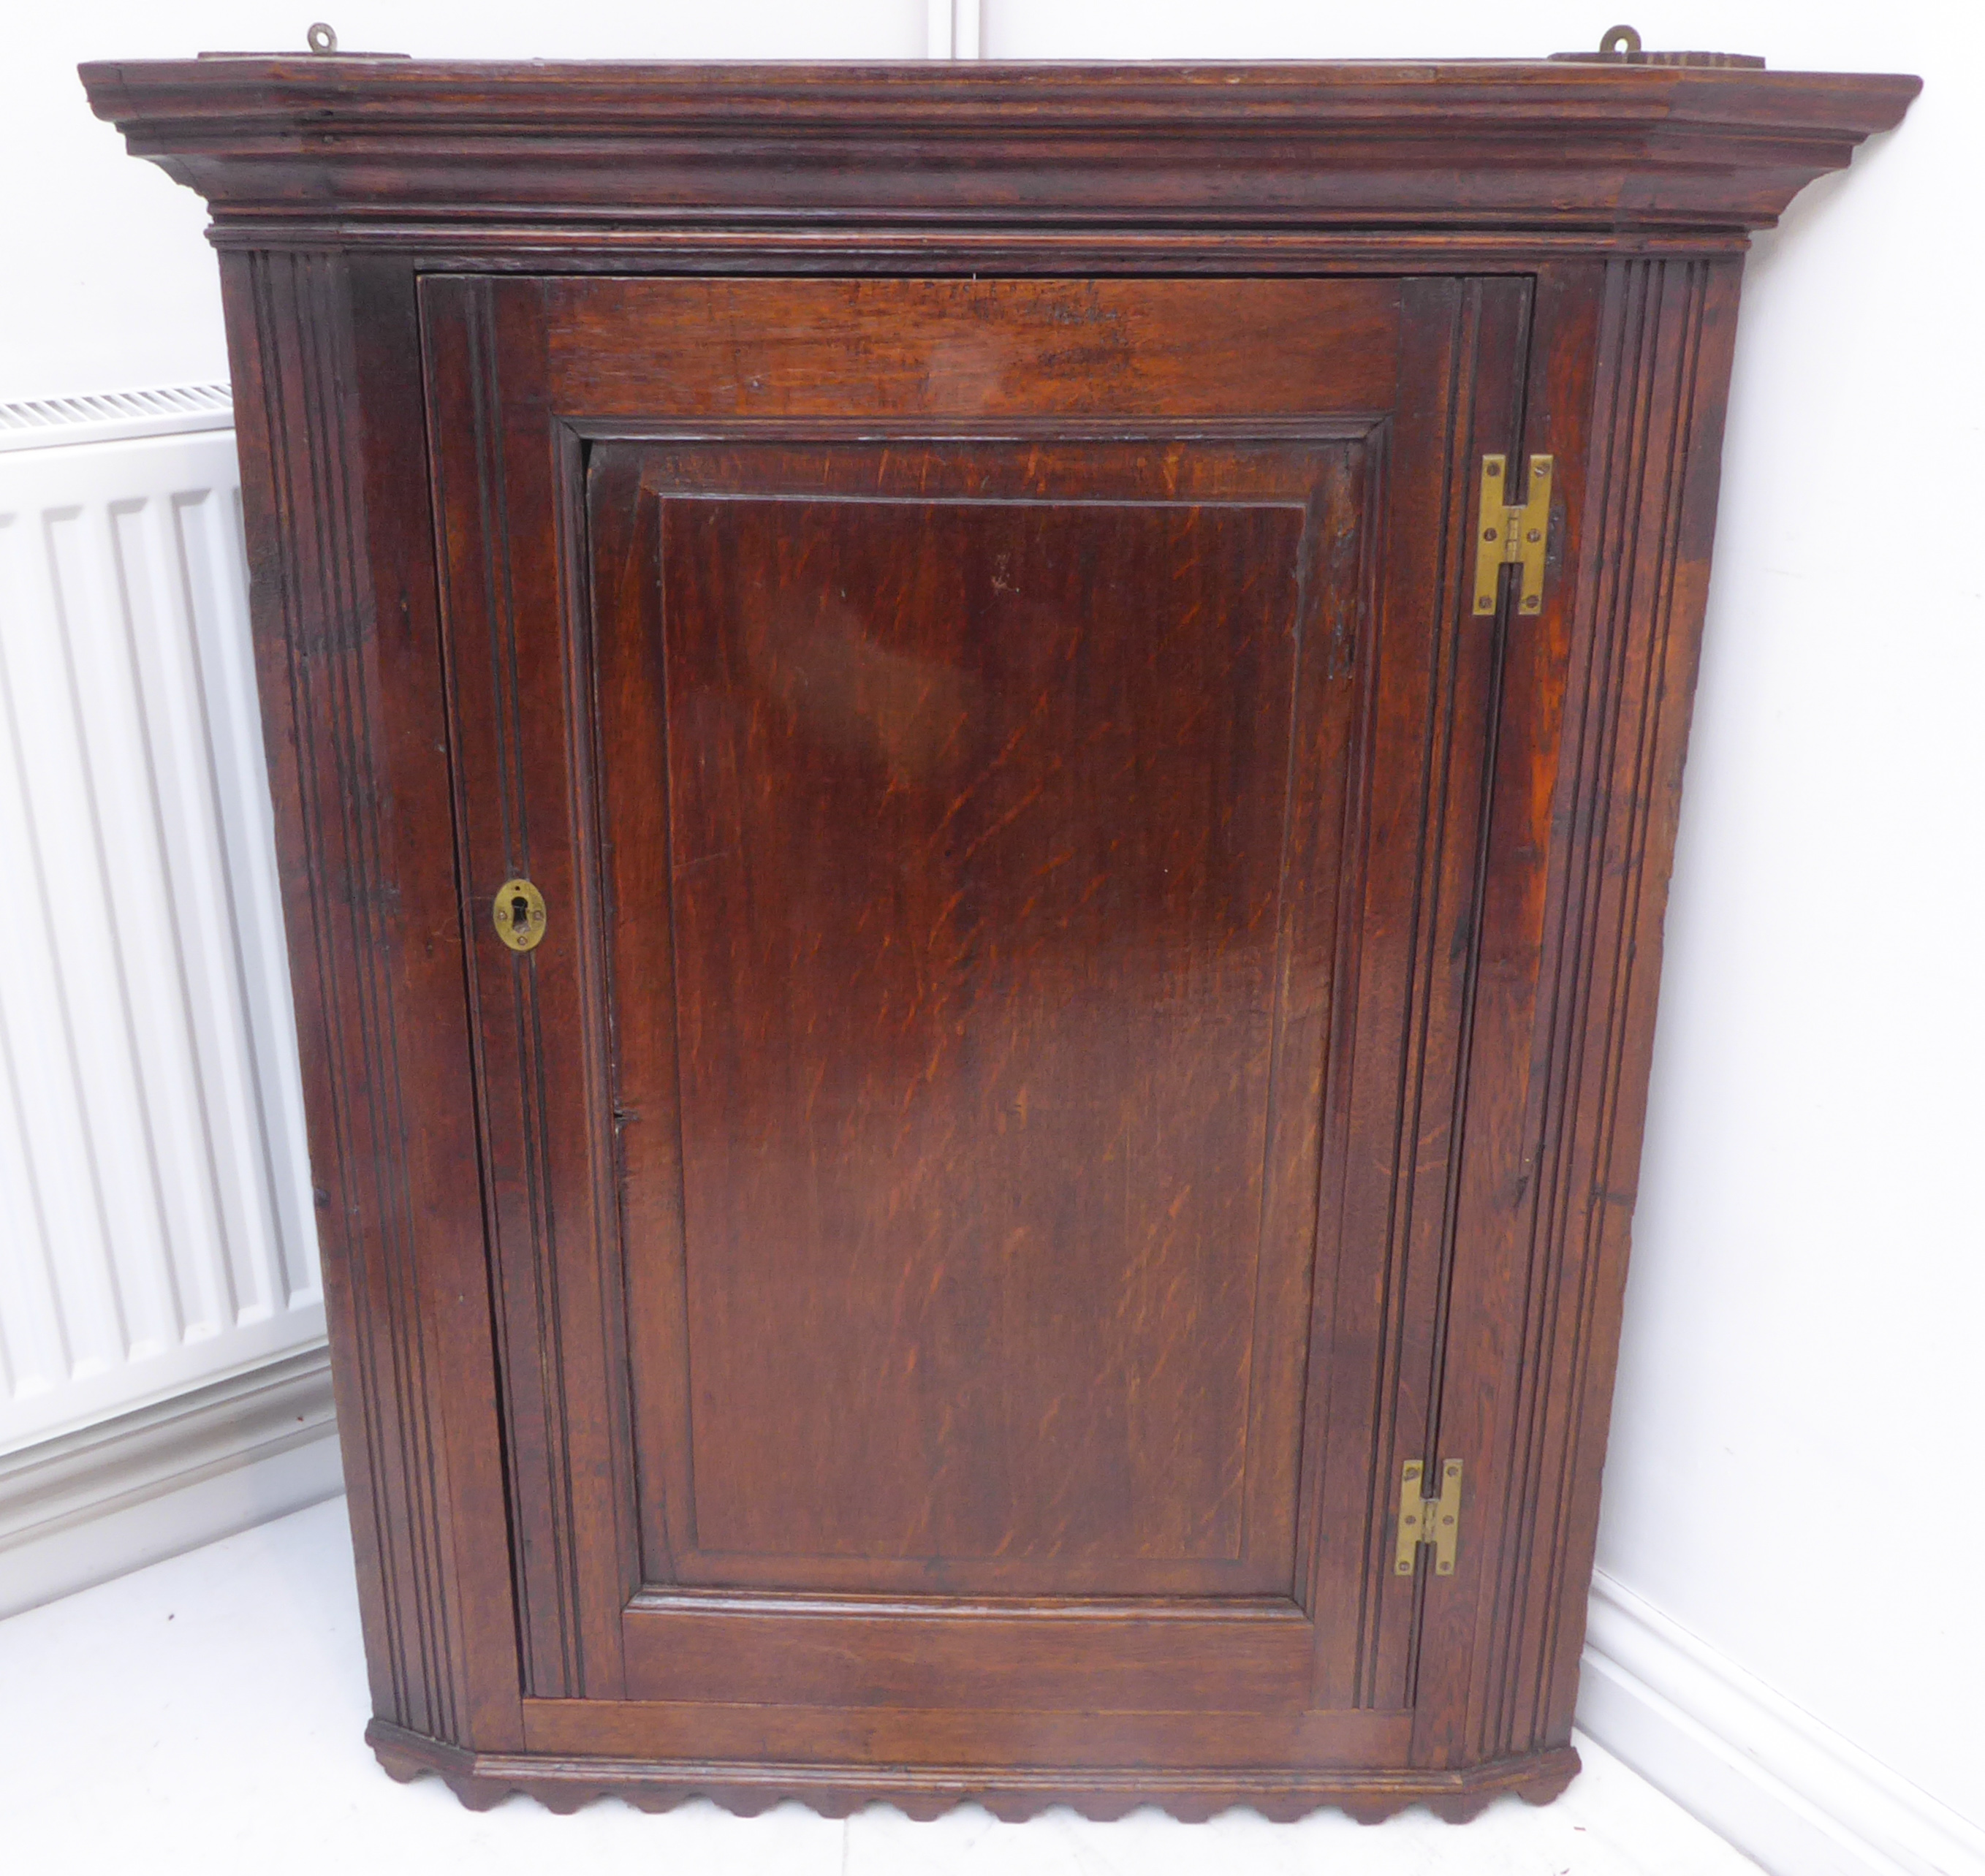 A late 18th century oak hanging corner cupboard; the single fielded panel door with brass H-form